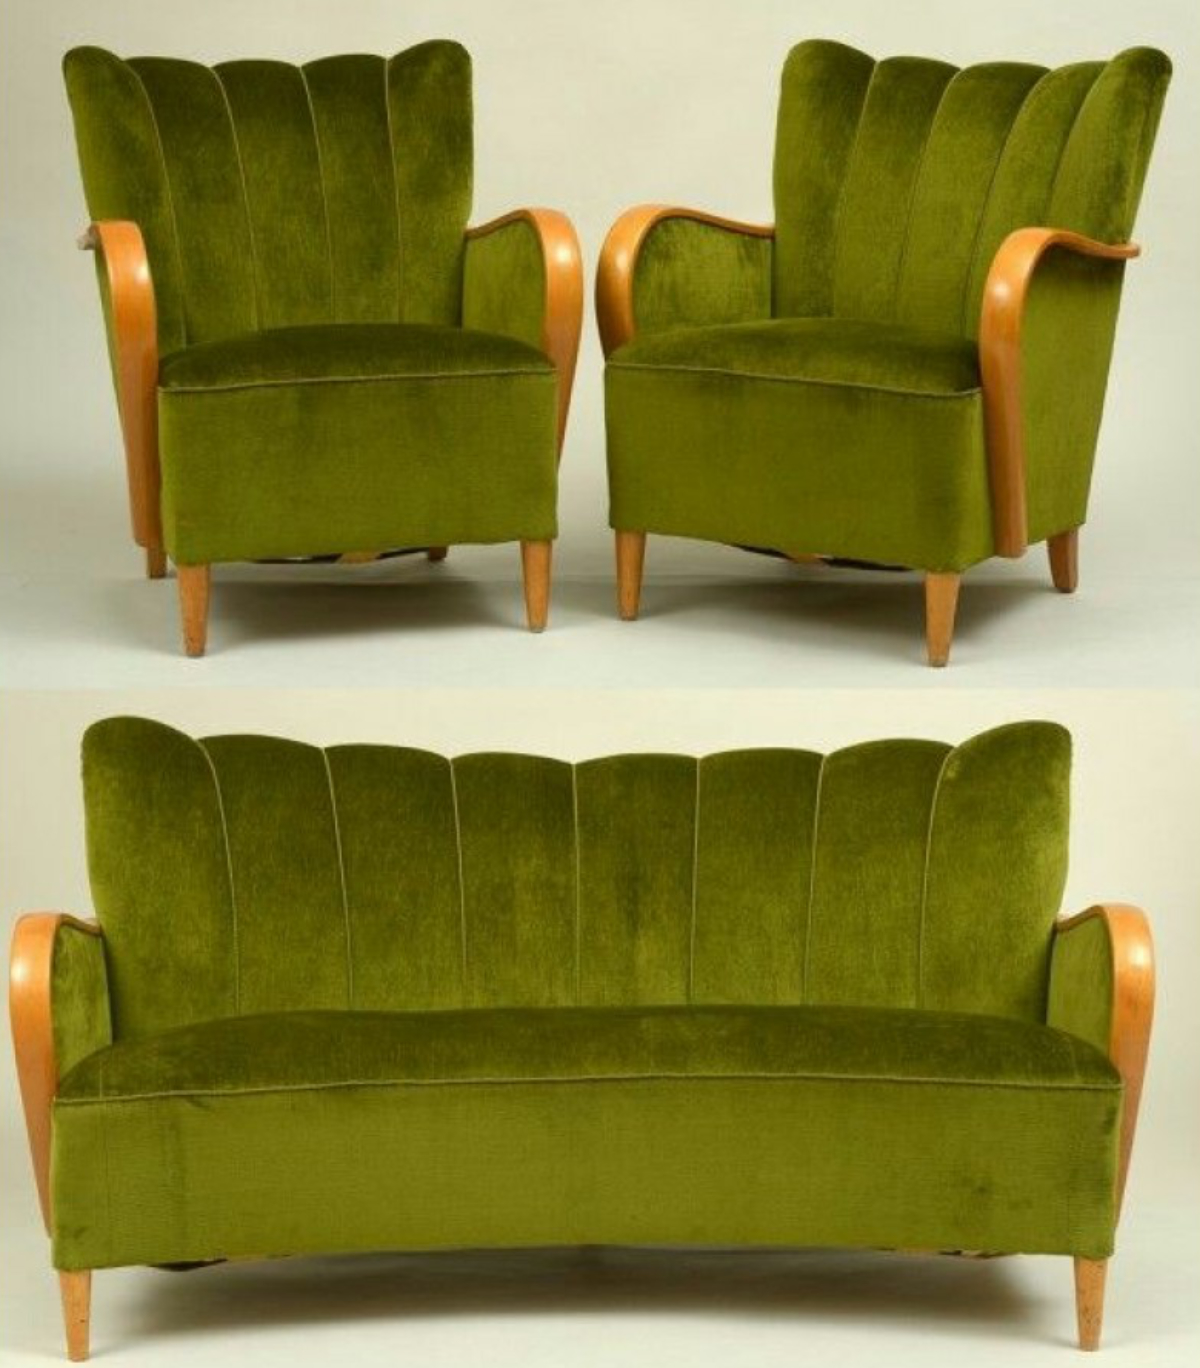 Caribbean Green 5 seaters Sofas